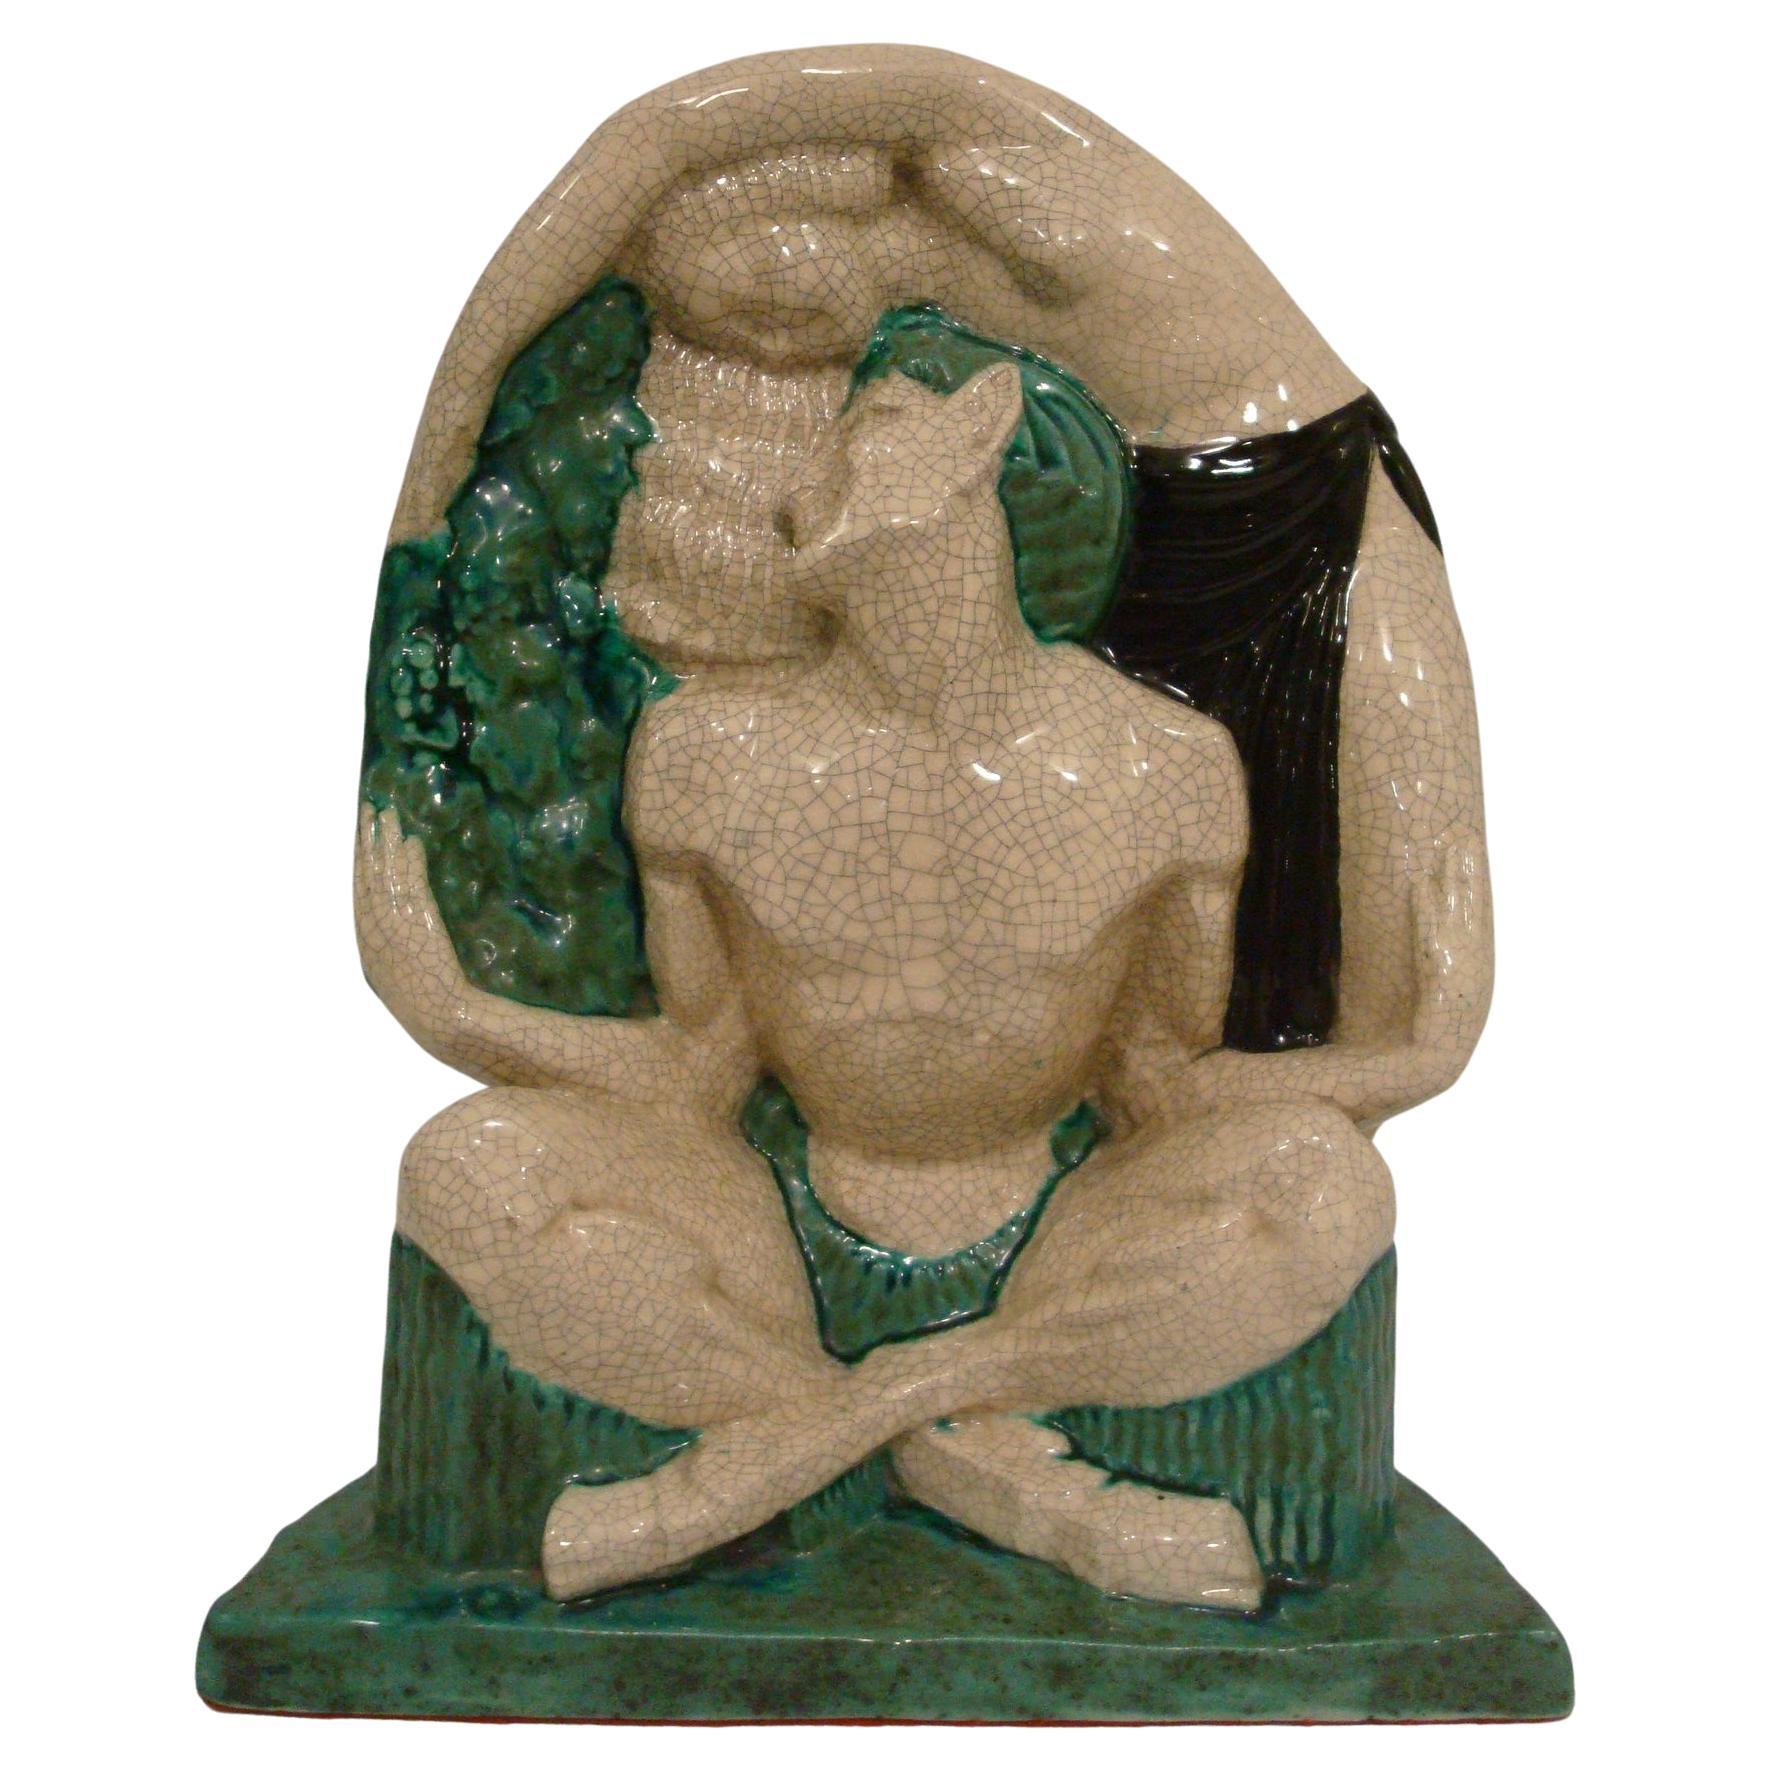 Satyr and Nude Women Glazed Ceramic Sculpture, Figure by Le Faguays & E. Cazaux For Sale